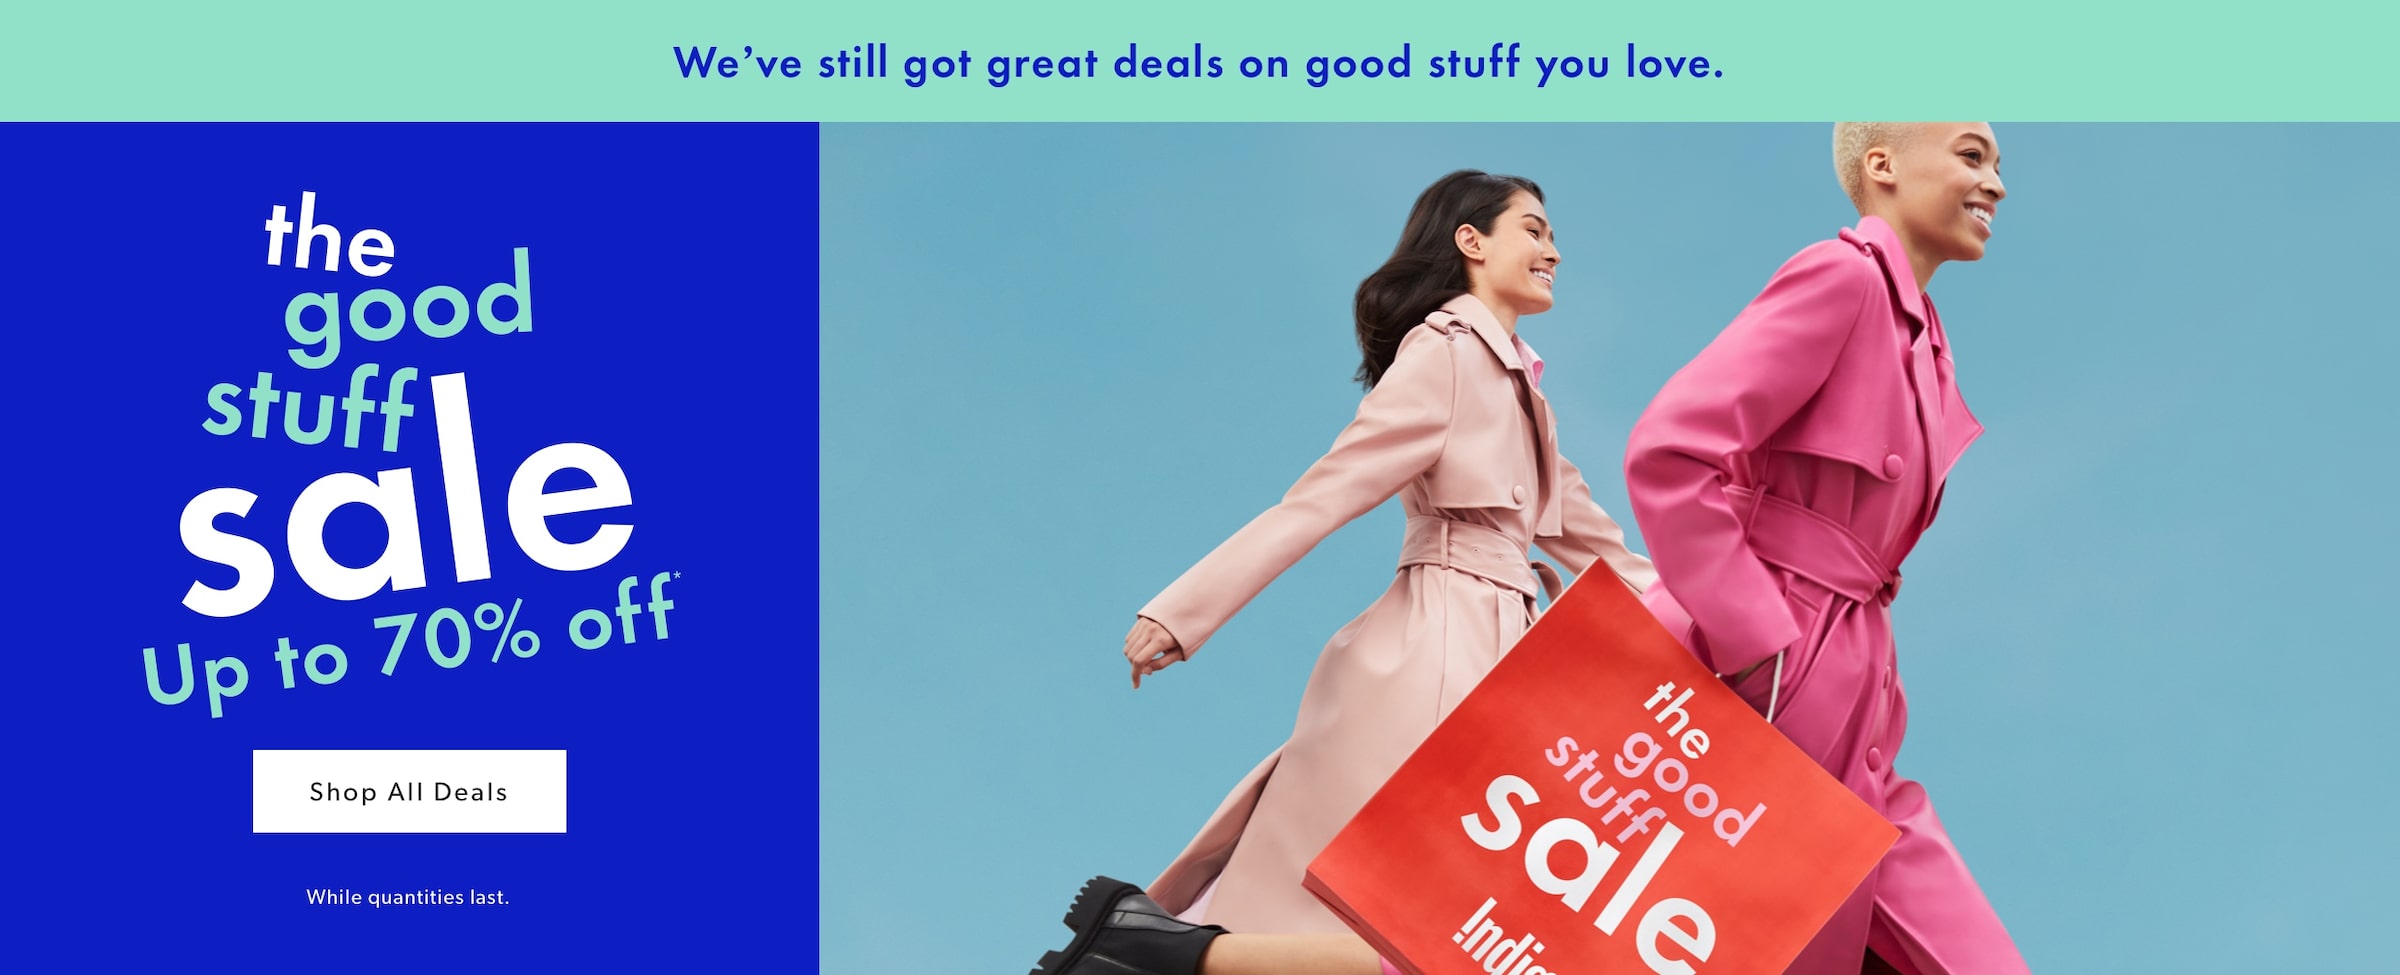 Up to 70% off The Good Stuff Sale.